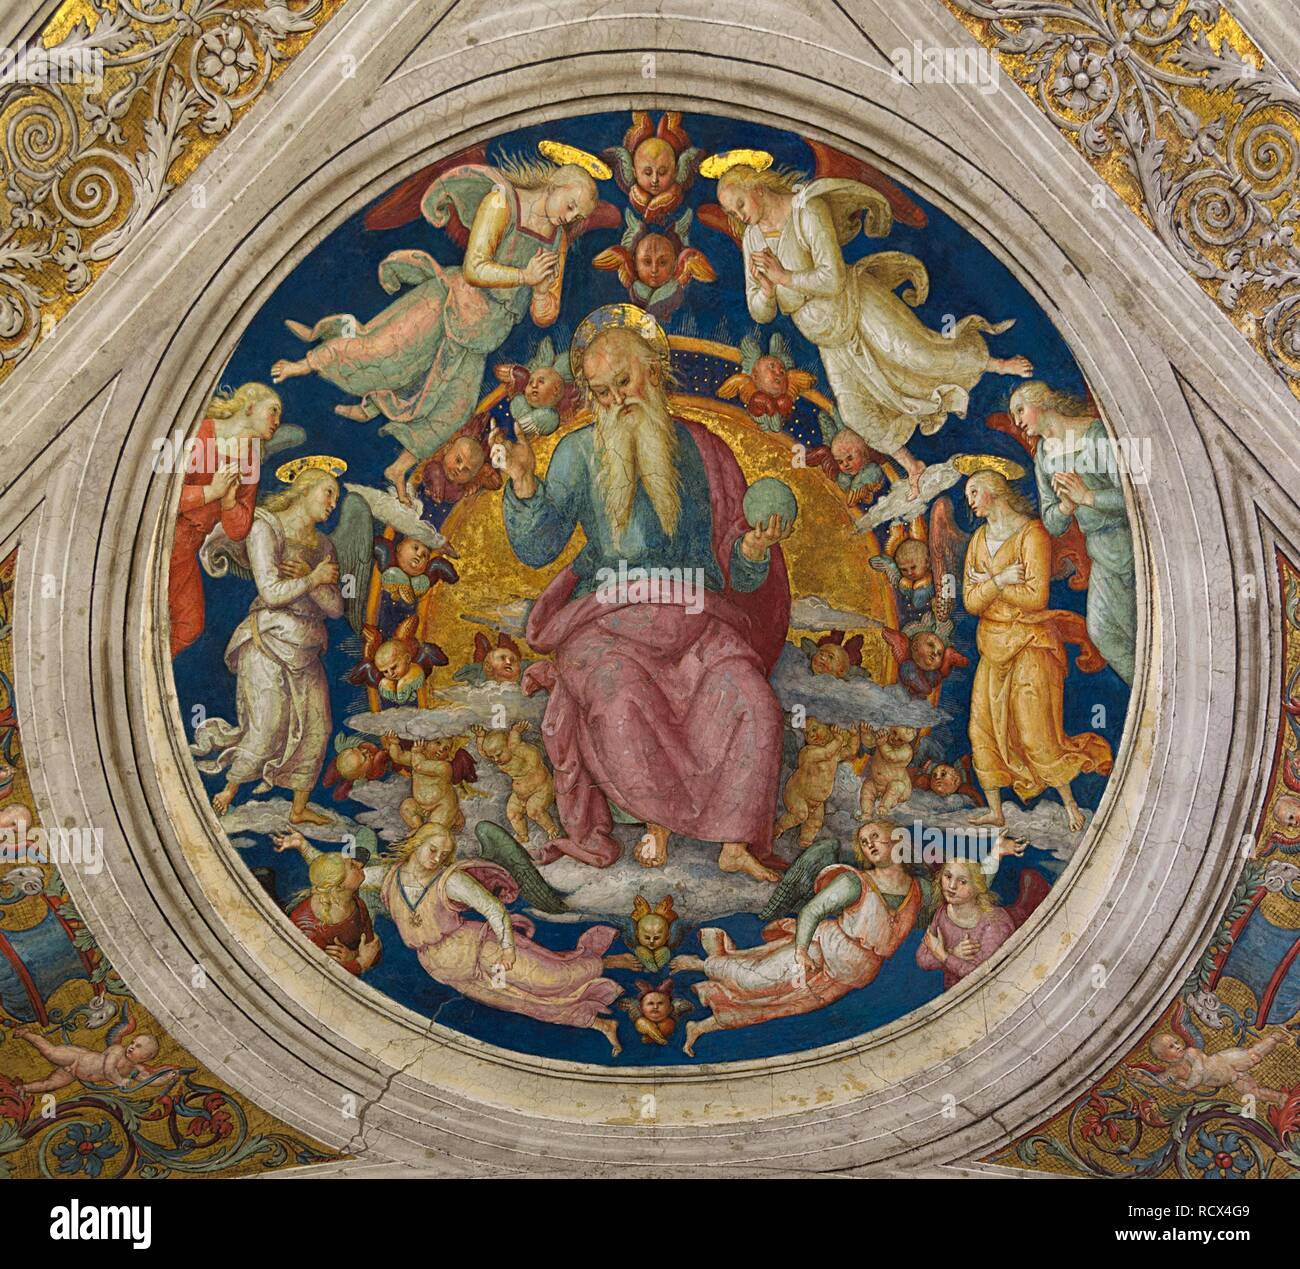 God the Father with Angels (From the Stanza dell'incendio di Borgo). Museum: Apostolic Palace, Vatican. Author: PERUGINO. Stock Photo